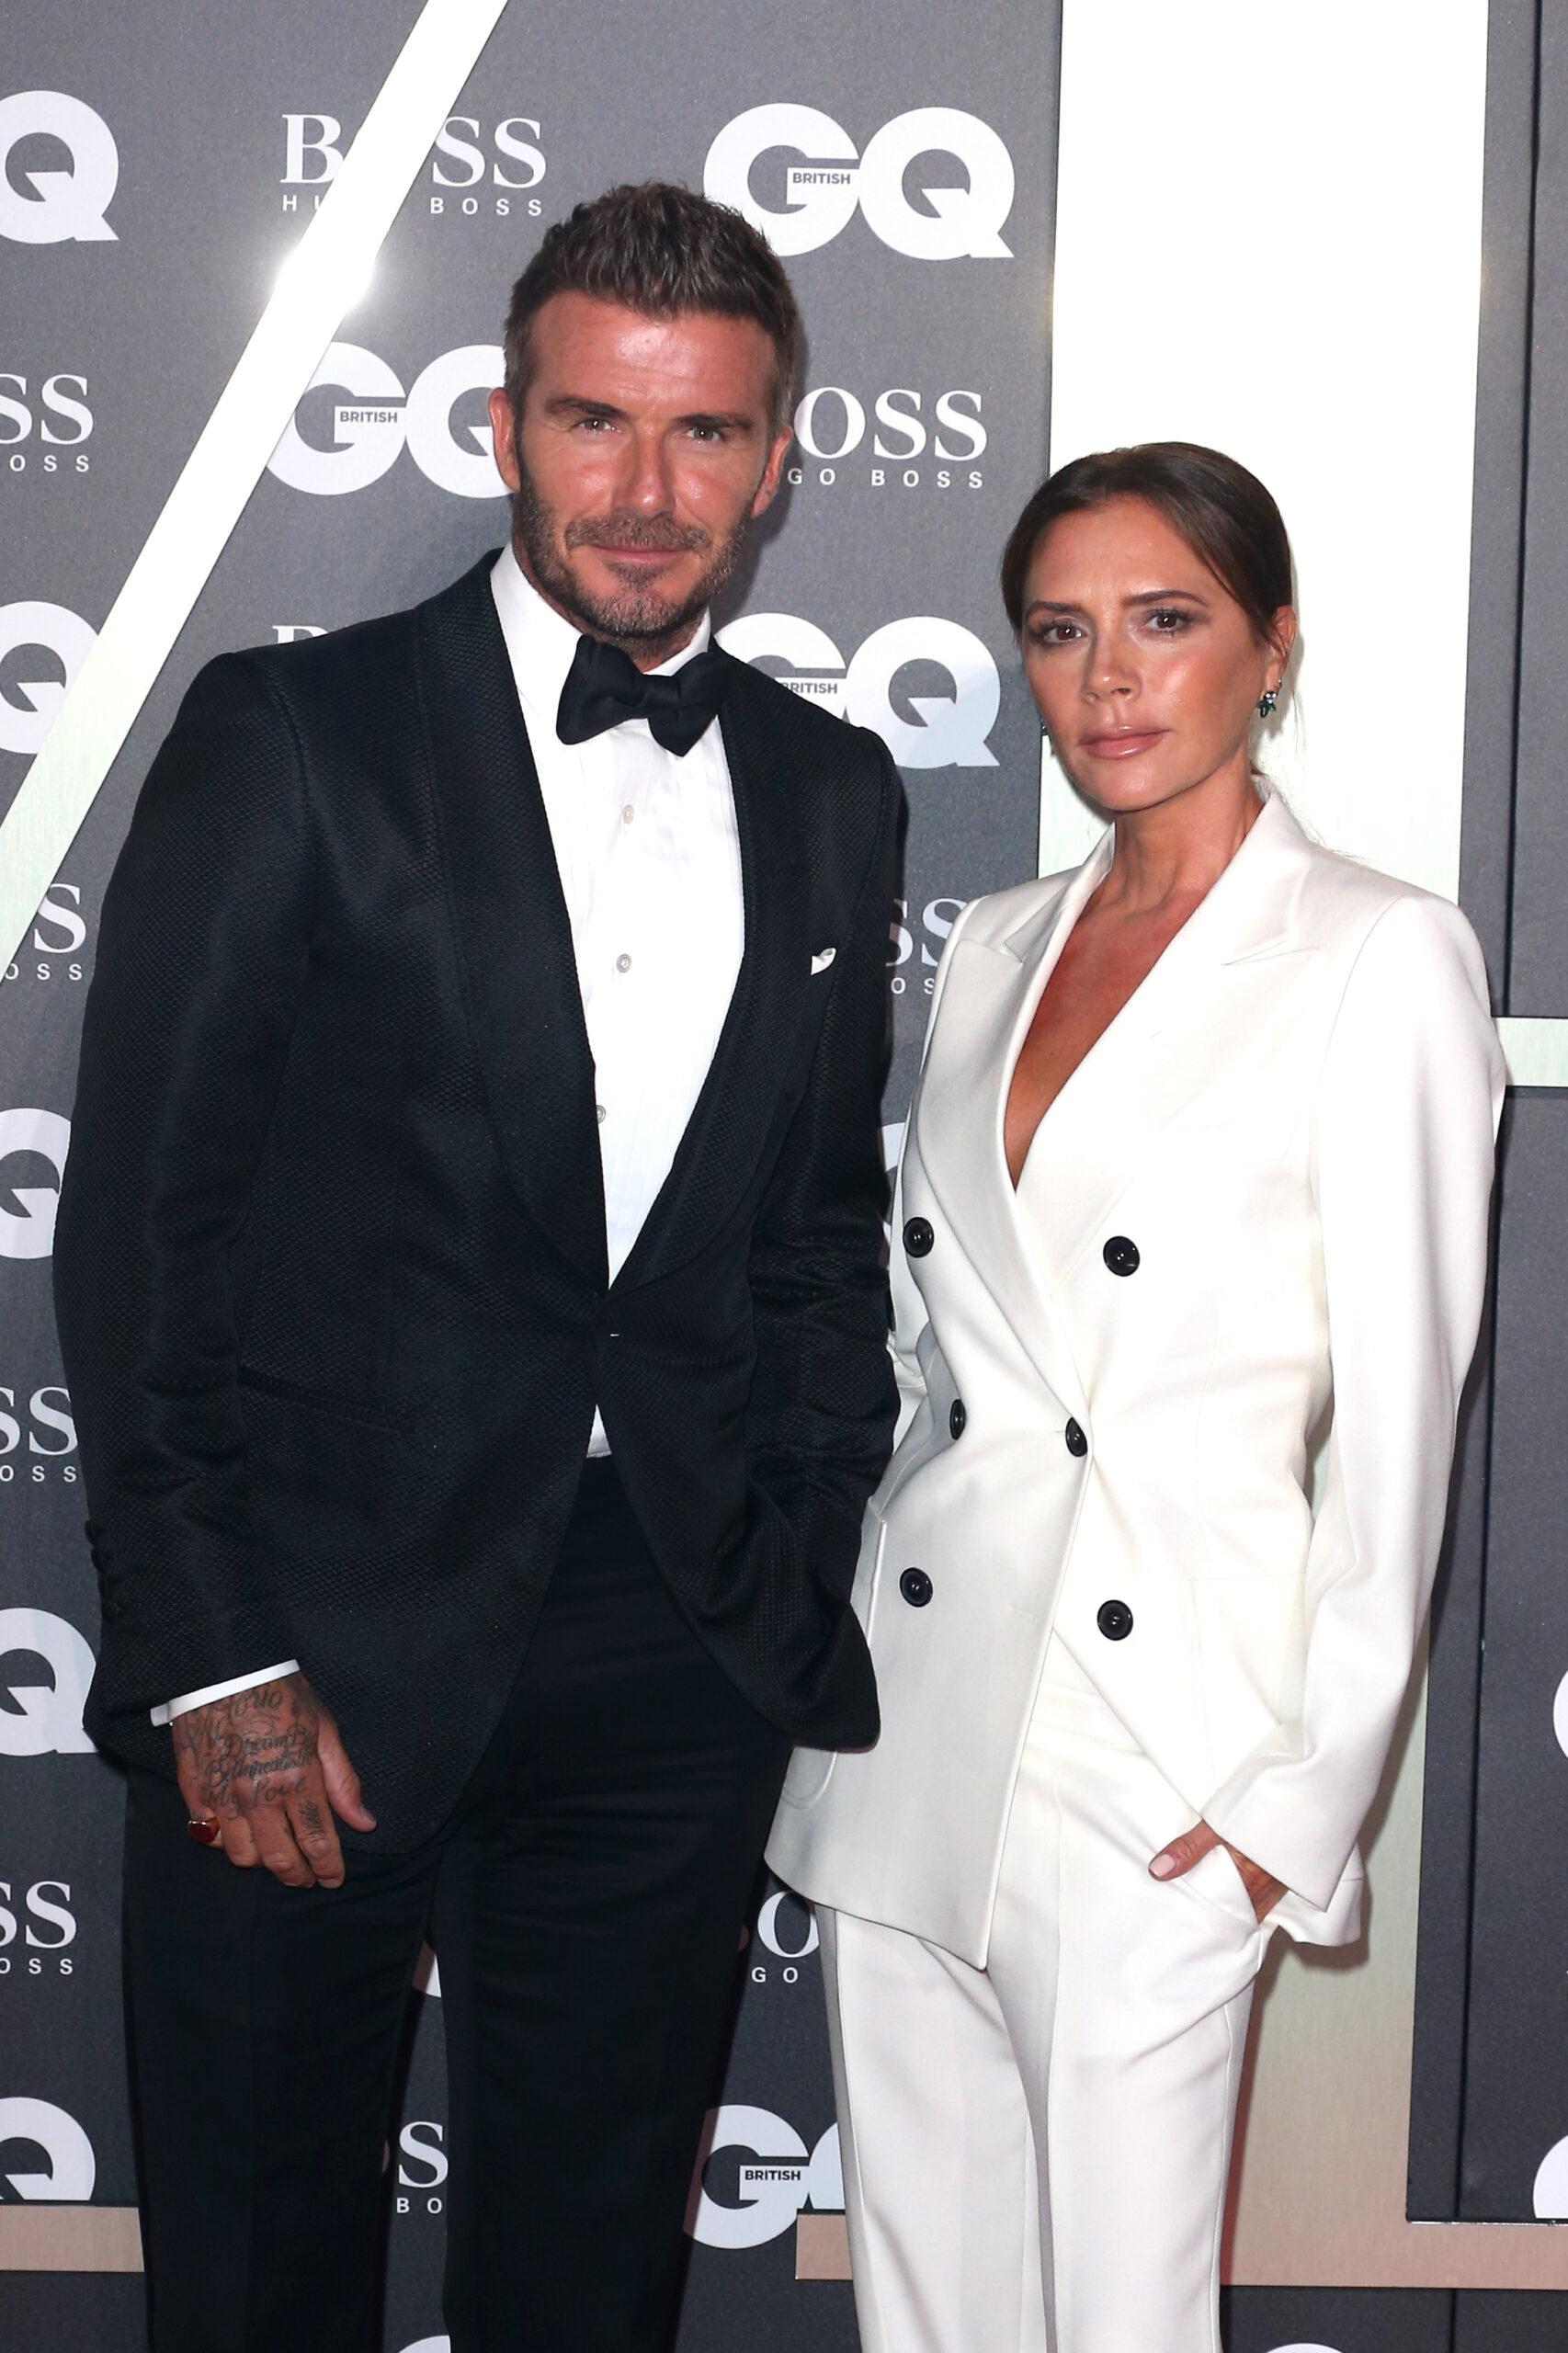 David and Victoria Beckham GQ Men of the Year Awards in London, UK.